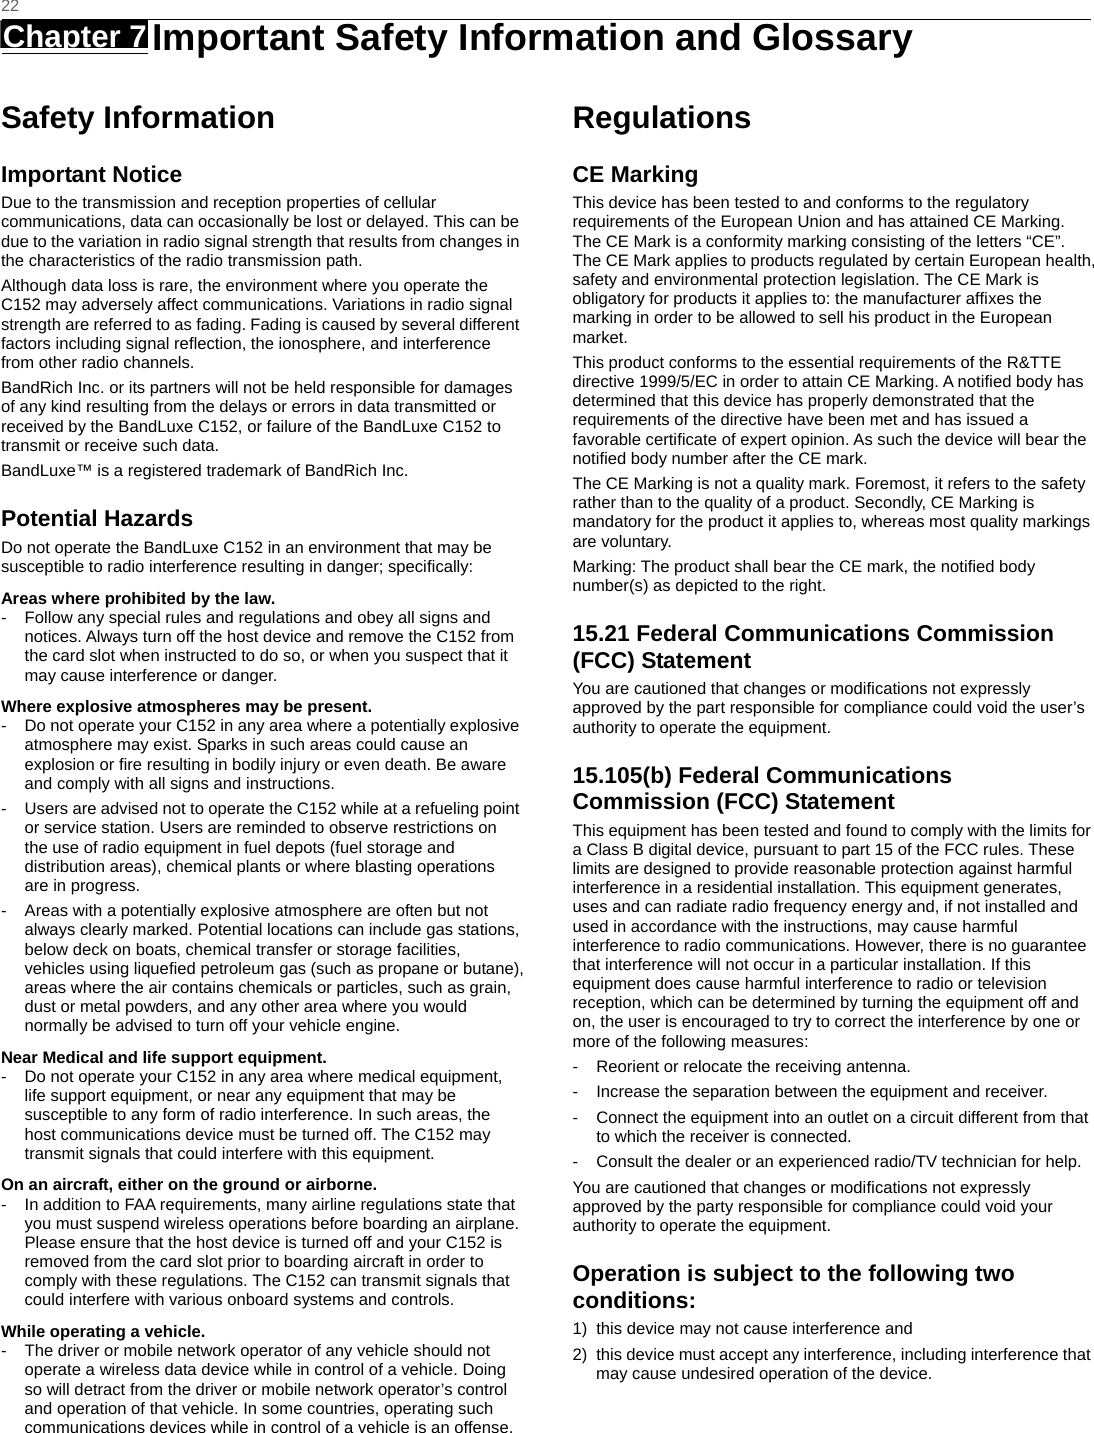   22 Chapter 7   Important Safety Information and Glossary   Safety Information Important Notice Due to the transmission and reception properties of cellular communications, data can occasionally be lost or delayed. This can be due to the variation in radio signal strength that results from changes in the characteristics of the radio transmission path.   Although data loss is rare, the environment where you operate the C152 may adversely affect communications. Variations in radio signal strength are referred to as fading. Fading is caused by several different factors including signal reﬂection, the ionosphere, and interference from other radio channels.   BandRich Inc. or its partners will not be held responsible for damages of any kind resulting from the delays or errors in data transmitted or received by the BandLuxe C152, or failure of the BandLuxe C152 to transmit or receive such data.   BandLuxe™ is a registered trademark of BandRich Inc. Potential Hazards Do not operate the BandLuxe C152 in an environment that may be susceptible to radio interference resulting in danger; speciﬁcally:  Areas where prohibited by the law. -  Follow any special rules and regulations and obey all signs and notices. Always turn off the host device and remove the C152 from the card slot when instructed to do so, or when you suspect that it may cause interference or danger.   Where explosive atmospheres may be present. -  Do not operate your C152 in any area where a potentially explosive atmosphere may exist. Sparks in such areas could cause an explosion or ﬁre resulting in bodily injury or even death. Be aware and comply with all signs and instructions. -  Users are advised not to operate the C152 while at a refueling point or service station. Users are reminded to observe restrictions on the use of radio equipment in fuel depots (fuel storage and distribution areas), chemical plants or where blasting operations are in progress. -  Areas with a potentially explosive atmosphere are often but not always clearly marked. Potential locations can include gas stations, below deck on boats, chemical transfer or storage facilities, vehicles using liqueﬁed petroleum gas (such as propane or butane), areas where the air contains chemicals or particles, such as grain, dust or metal powders, and any other area where you would normally be advised to turn off your vehicle engine. Near Medical and life support equipment. -  Do not operate your C152 in any area where medical equipment, life support equipment, or near any equipment that may be susceptible to any form of radio interference. In such areas, the host communications device must be turned off. The C152 may transmit signals that could interfere with this equipment.   On an aircraft, either on the ground or airborne. -  In addition to FAA requirements, many airline regulations state that you must suspend wireless operations before boarding an airplane. Please ensure that the host device is turned off and your C152 is removed from the card slot prior to boarding aircraft in order to comply with these regulations. The C152 can transmit signals that could interfere with various onboard systems and controls.   While operating a vehicle. -  The driver or mobile network operator of any vehicle should not operate a wireless data device while in control of a vehicle. Doing so will detract from the driver or mobile network operator’s control and operation of that vehicle. In some countries, operating such communications devices while in control of a vehicle is an offense.   Regulations CE Marking This device has been tested to and conforms to the regulatory requirements of the European Union and has attained CE Marking. The CE Mark is a conformity marking consisting of the letters “CE”. The CE Mark applies to products regulated by certain European health, safety and environmental protection legislation. The CE Mark is obligatory for products it applies to: the manufacturer afﬁxes the marking in order to be allowed to sell his product in the European market. This product conforms to the essential requirements of the R&amp;TTE directive 1999/5/EC in order to attain CE Marking. A notiﬁed body has determined that this device has properly demonstrated that the requirements of the directive have been met and has issued a favorable certiﬁcate of expert opinion. As such the device will bear the notiﬁed body number after the CE mark. The CE Marking is not a quality mark. Foremost, it refers to the safety rather than to the quality of a product. Secondly, CE Marking is mandatory for the product it applies to, whereas most quality markings are voluntary. Marking: The product shall bear the CE mark, the notiﬁed body number(s) as depicted to the right.   15.21 Federal Communications Commission (FCC) Statement You are cautioned that changes or modiﬁcations not expressly approved by the part responsible for compliance could void the user’s authority to operate the equipment. 15.105(b) Federal Communications Commission (FCC) Statement This equipment has been tested and found to comply with the limits for a Class B digital device, pursuant to part 15 of the FCC rules. These limits are designed to provide reasonable protection against harmful interference in a residential installation. This equipment generates, uses and can radiate radio frequency energy and, if not installed and used in accordance with the instructions, may cause harmful interference to radio communications. However, there is no guarantee that interference will not occur in a particular installation. If this equipment does cause harmful interference to radio or television reception, which can be determined by turning the equipment off and on, the user is encouraged to try to correct the interference by one or more of the following measures: -  Reorient or relocate the receiving antenna. -  Increase the separation between the equipment and receiver. -  Connect the equipment into an outlet on a circuit different from that to which the receiver is connected. -  Consult the dealer or an experienced radio/TV technician for help. You are cautioned that changes or modiﬁcations not expressly approved by the party responsible for compliance could void your authority to operate the equipment. Operation is subject to the following two conditions: 1)  this device may not cause interference and 2)  this device must accept any interference, including interference that may cause undesired operation of the device.  